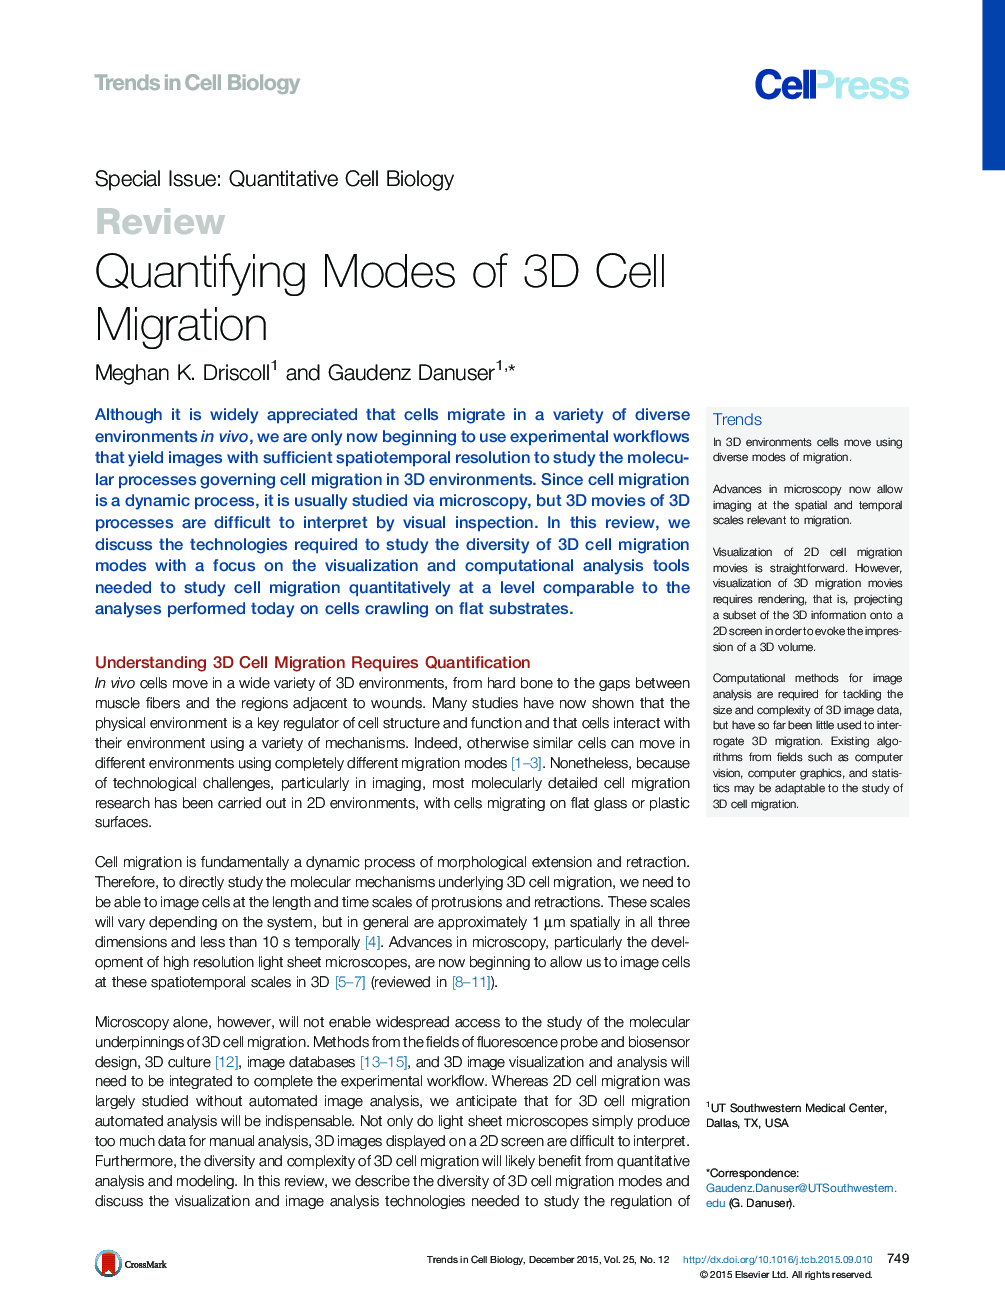 Quantifying Modes of 3D Cell Migration